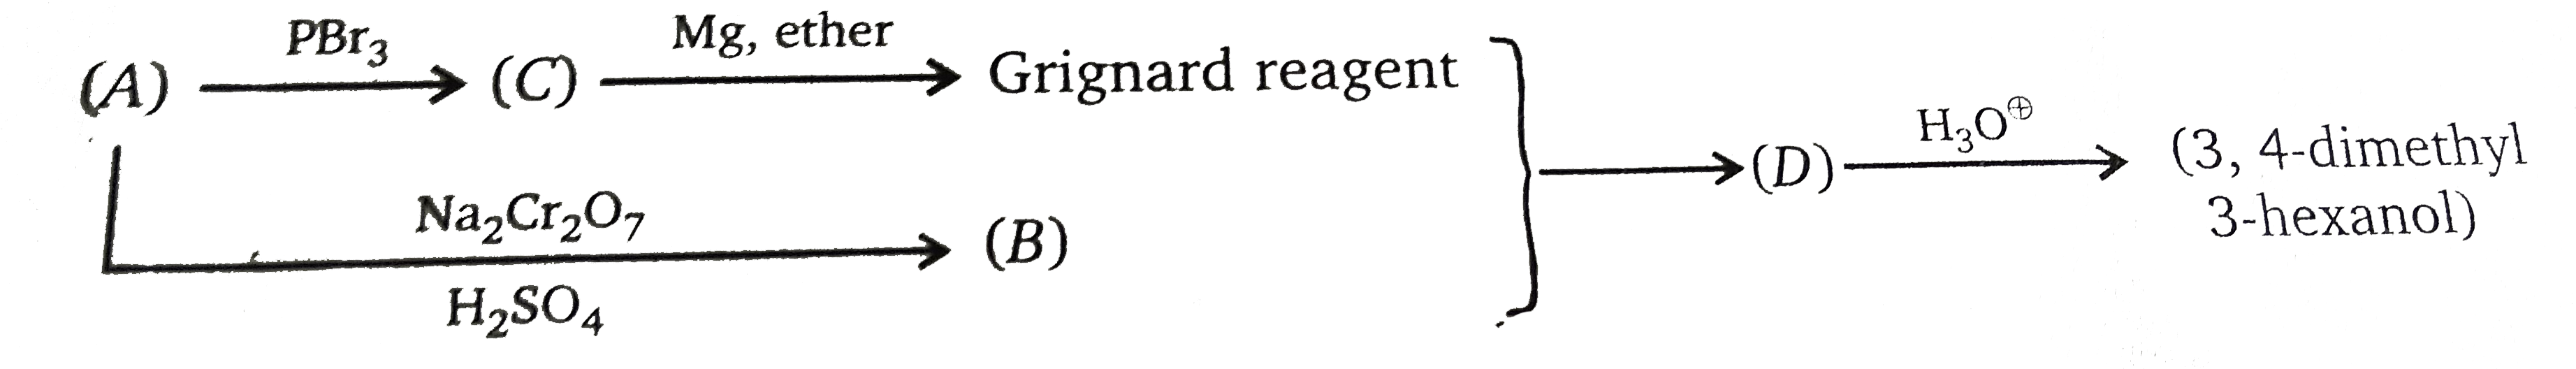 When Grignard reagent reacts with (B) product (D) will obtained. Reactant (A) of the above reaction is :